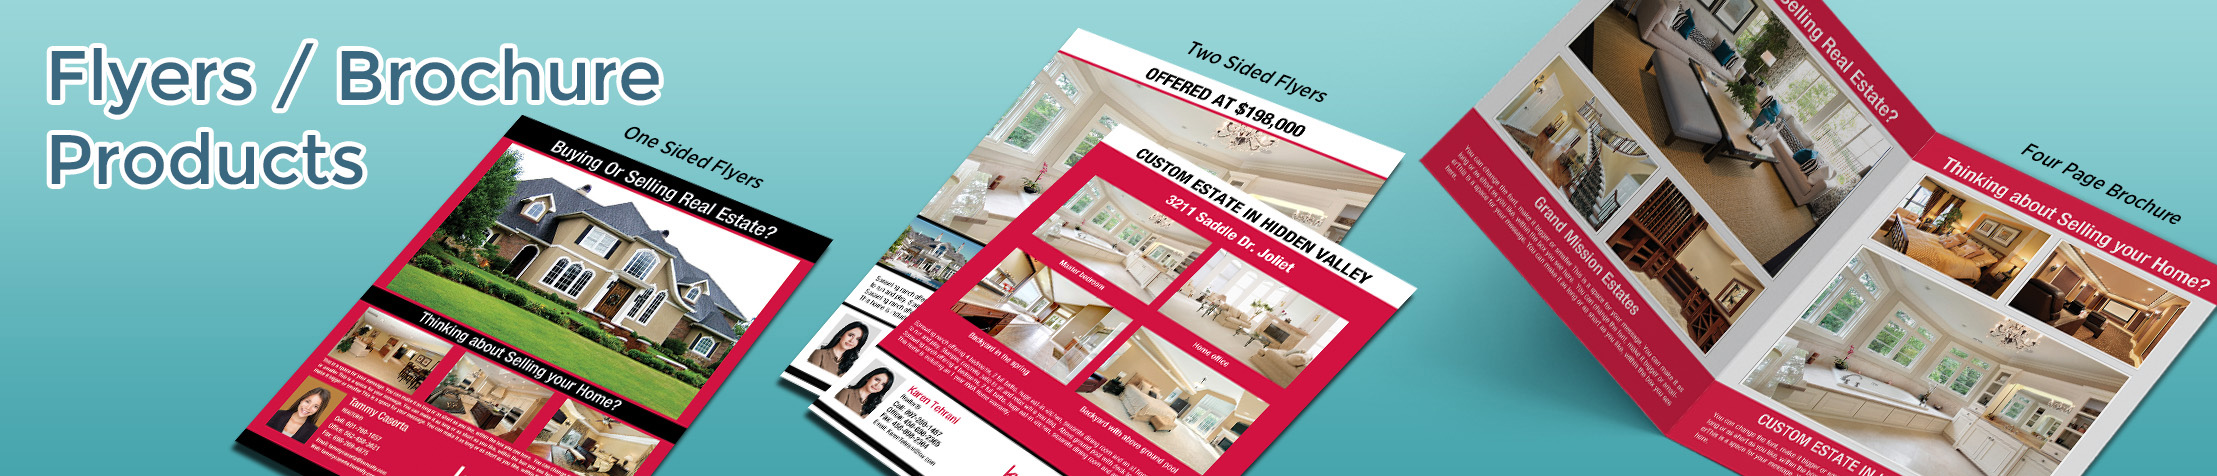 Keller Williams Real Estate Flyers and Brochures - KW approved vendor flyer and brochure templates for open houses and marketing | BestPrintBuy.com